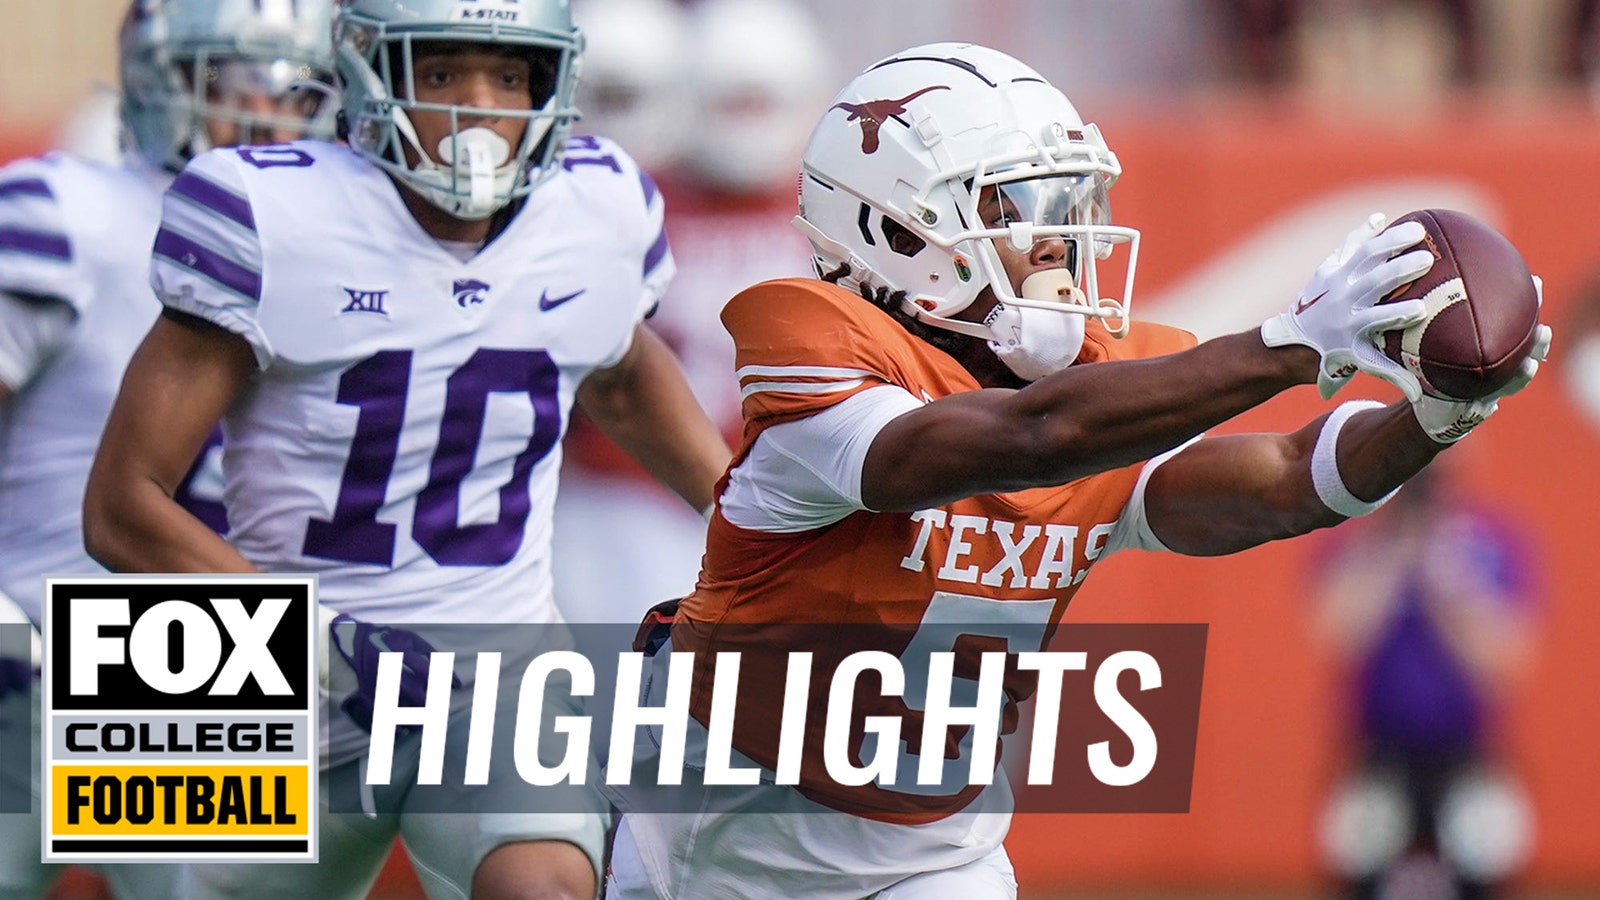 Highlights: The top plays from Texas' wild victory